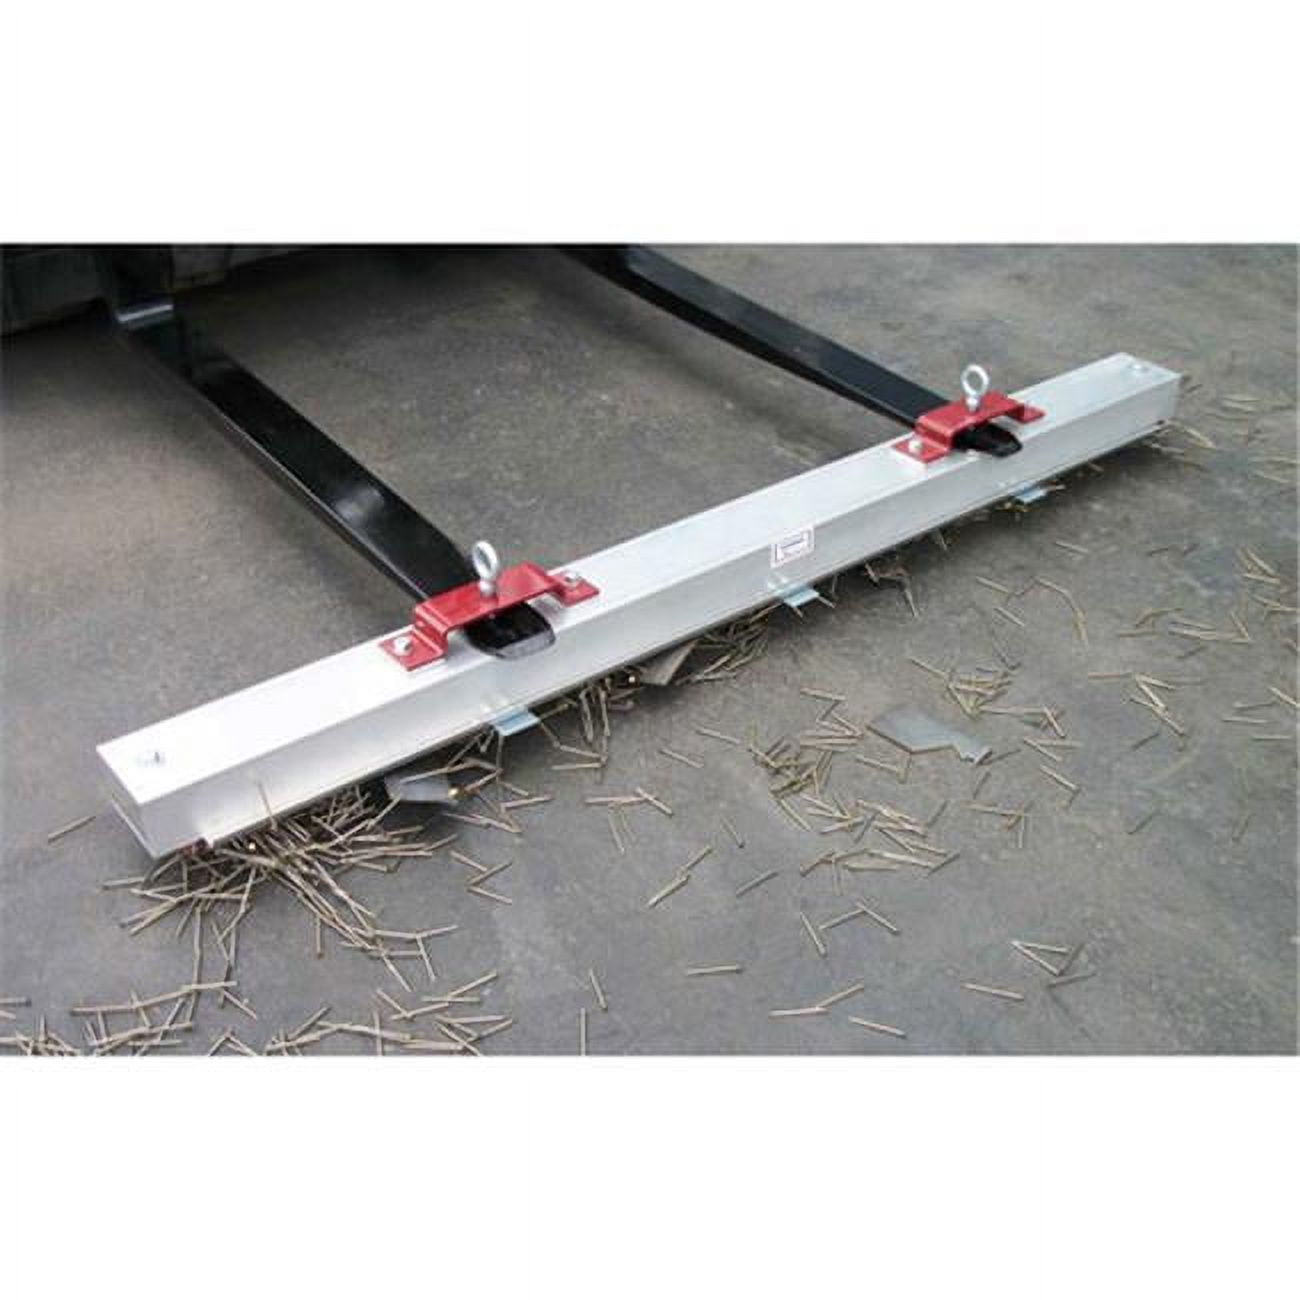 Rds-48lr 48 In. Double Strength Load Release Road Mag Sweeper - Silver & Burgundy